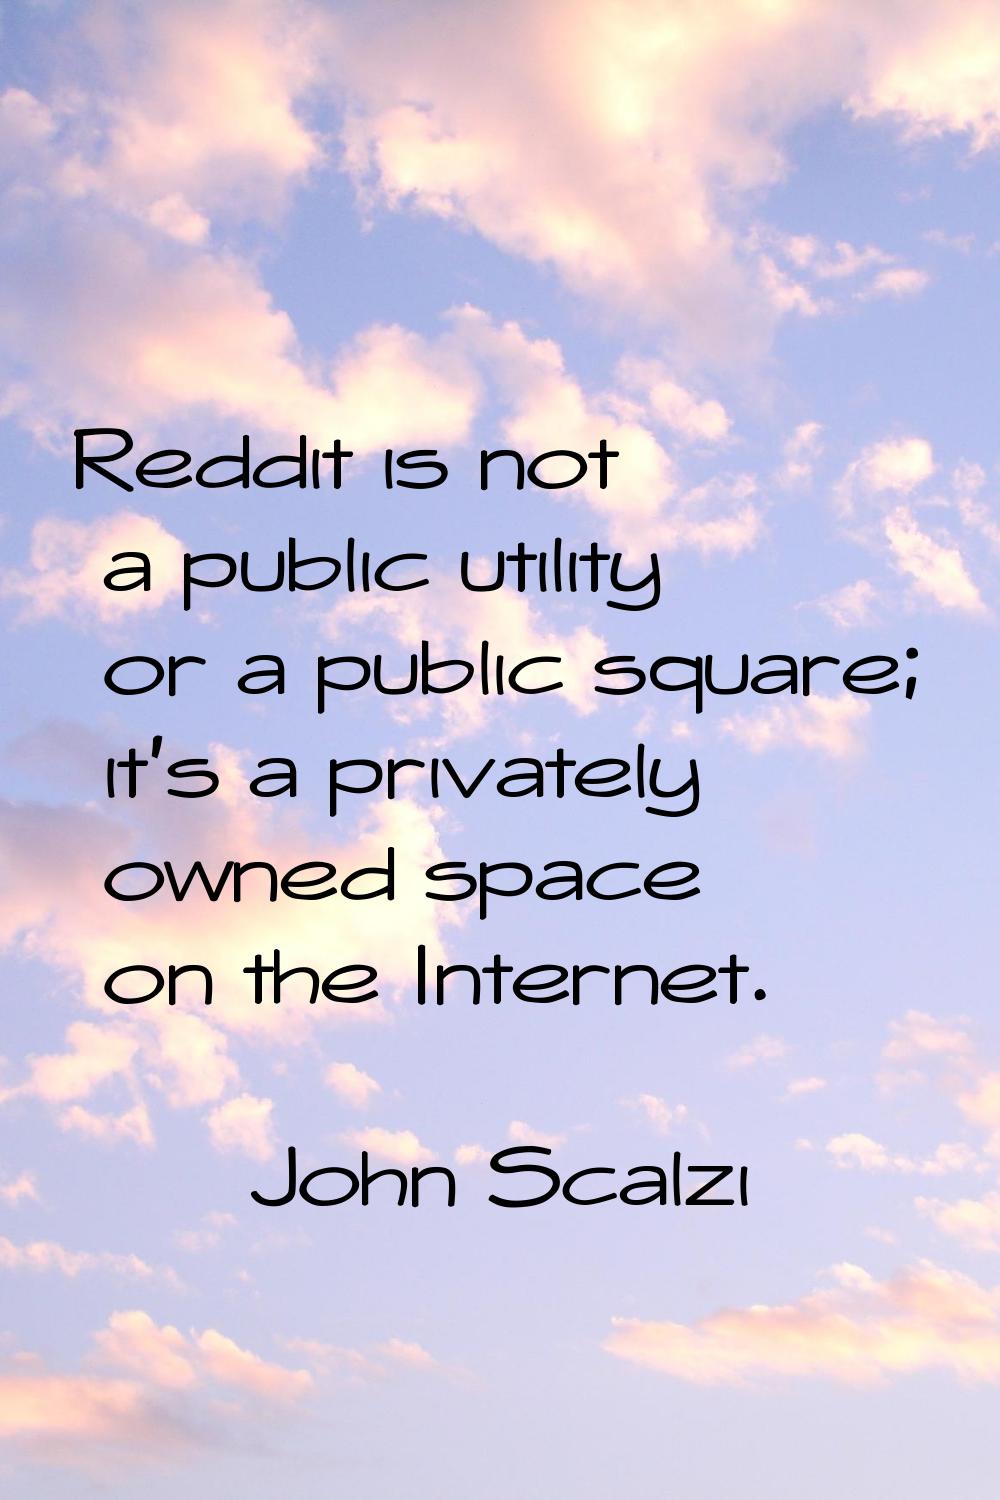 Reddit is not a public utility or a public square; it's a privately owned space on the Internet.